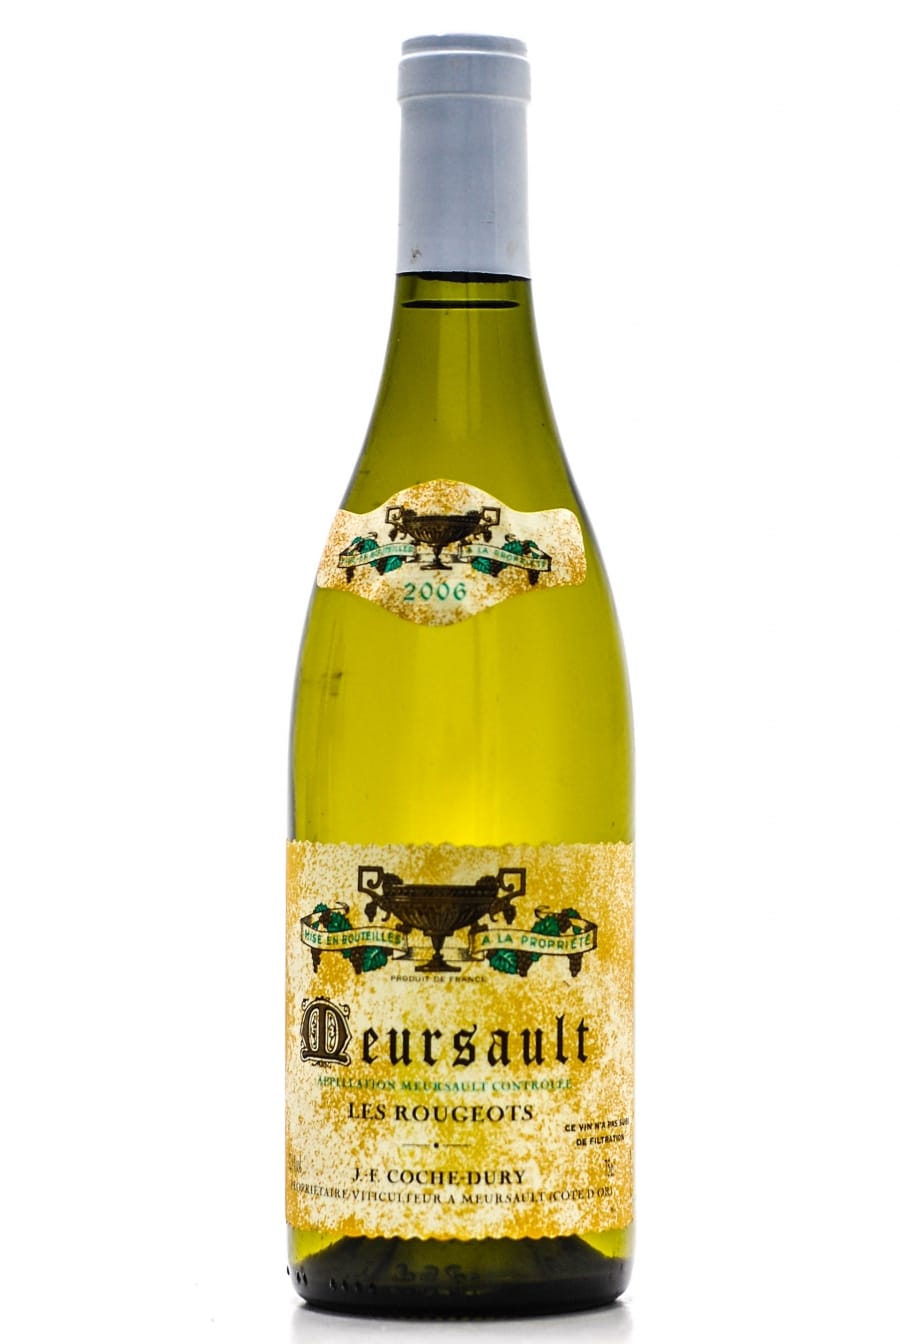 Coche Dury - Meursault Rougeots 2006 From Original Wooden Case